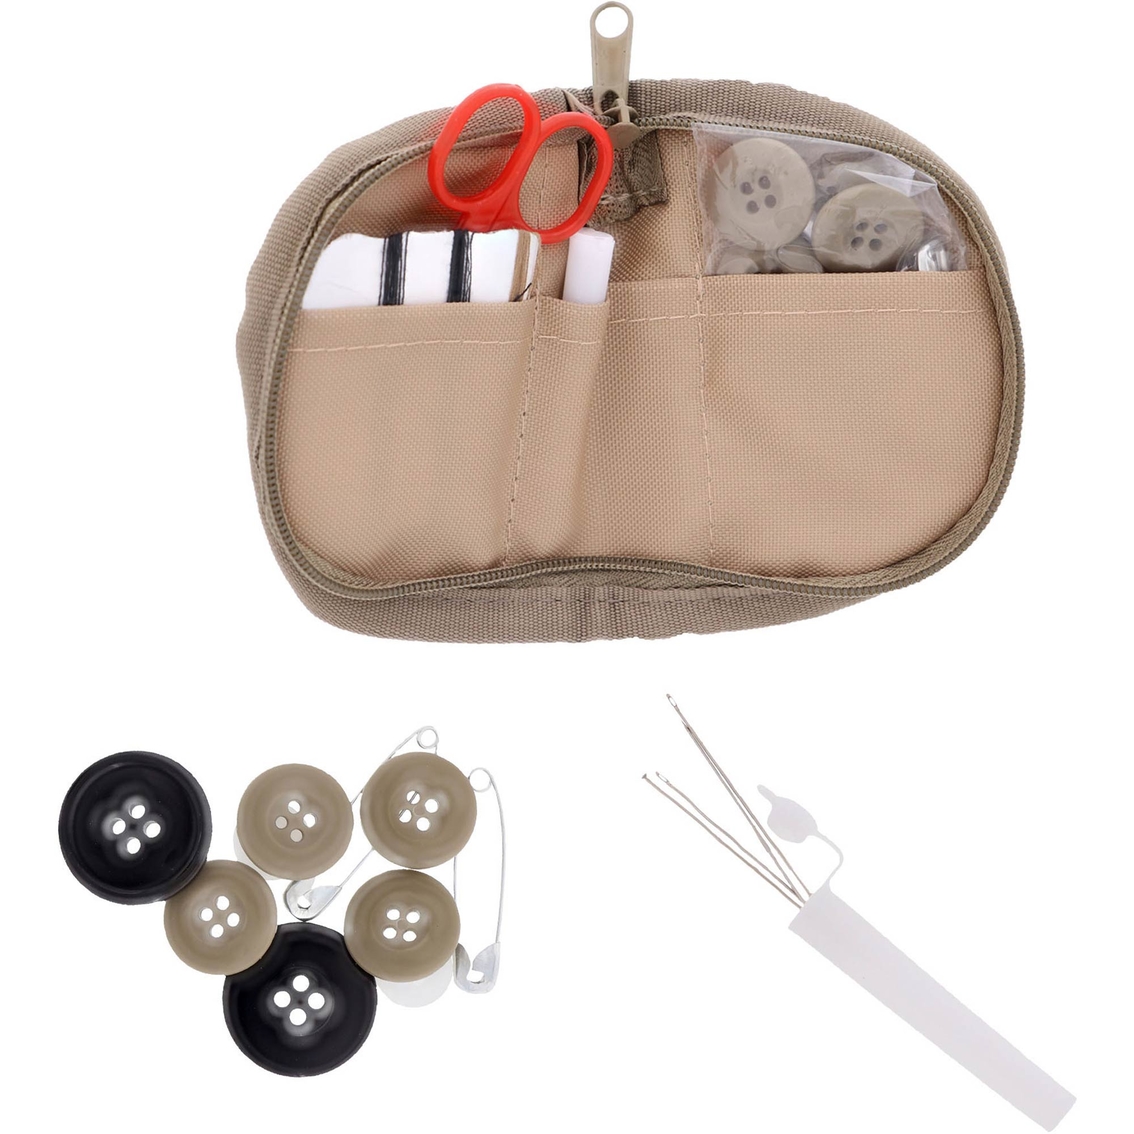 Brigade Qm Sewing Repair Kit (ocp), Vests & Chest Rigs, Sports & Outdoors